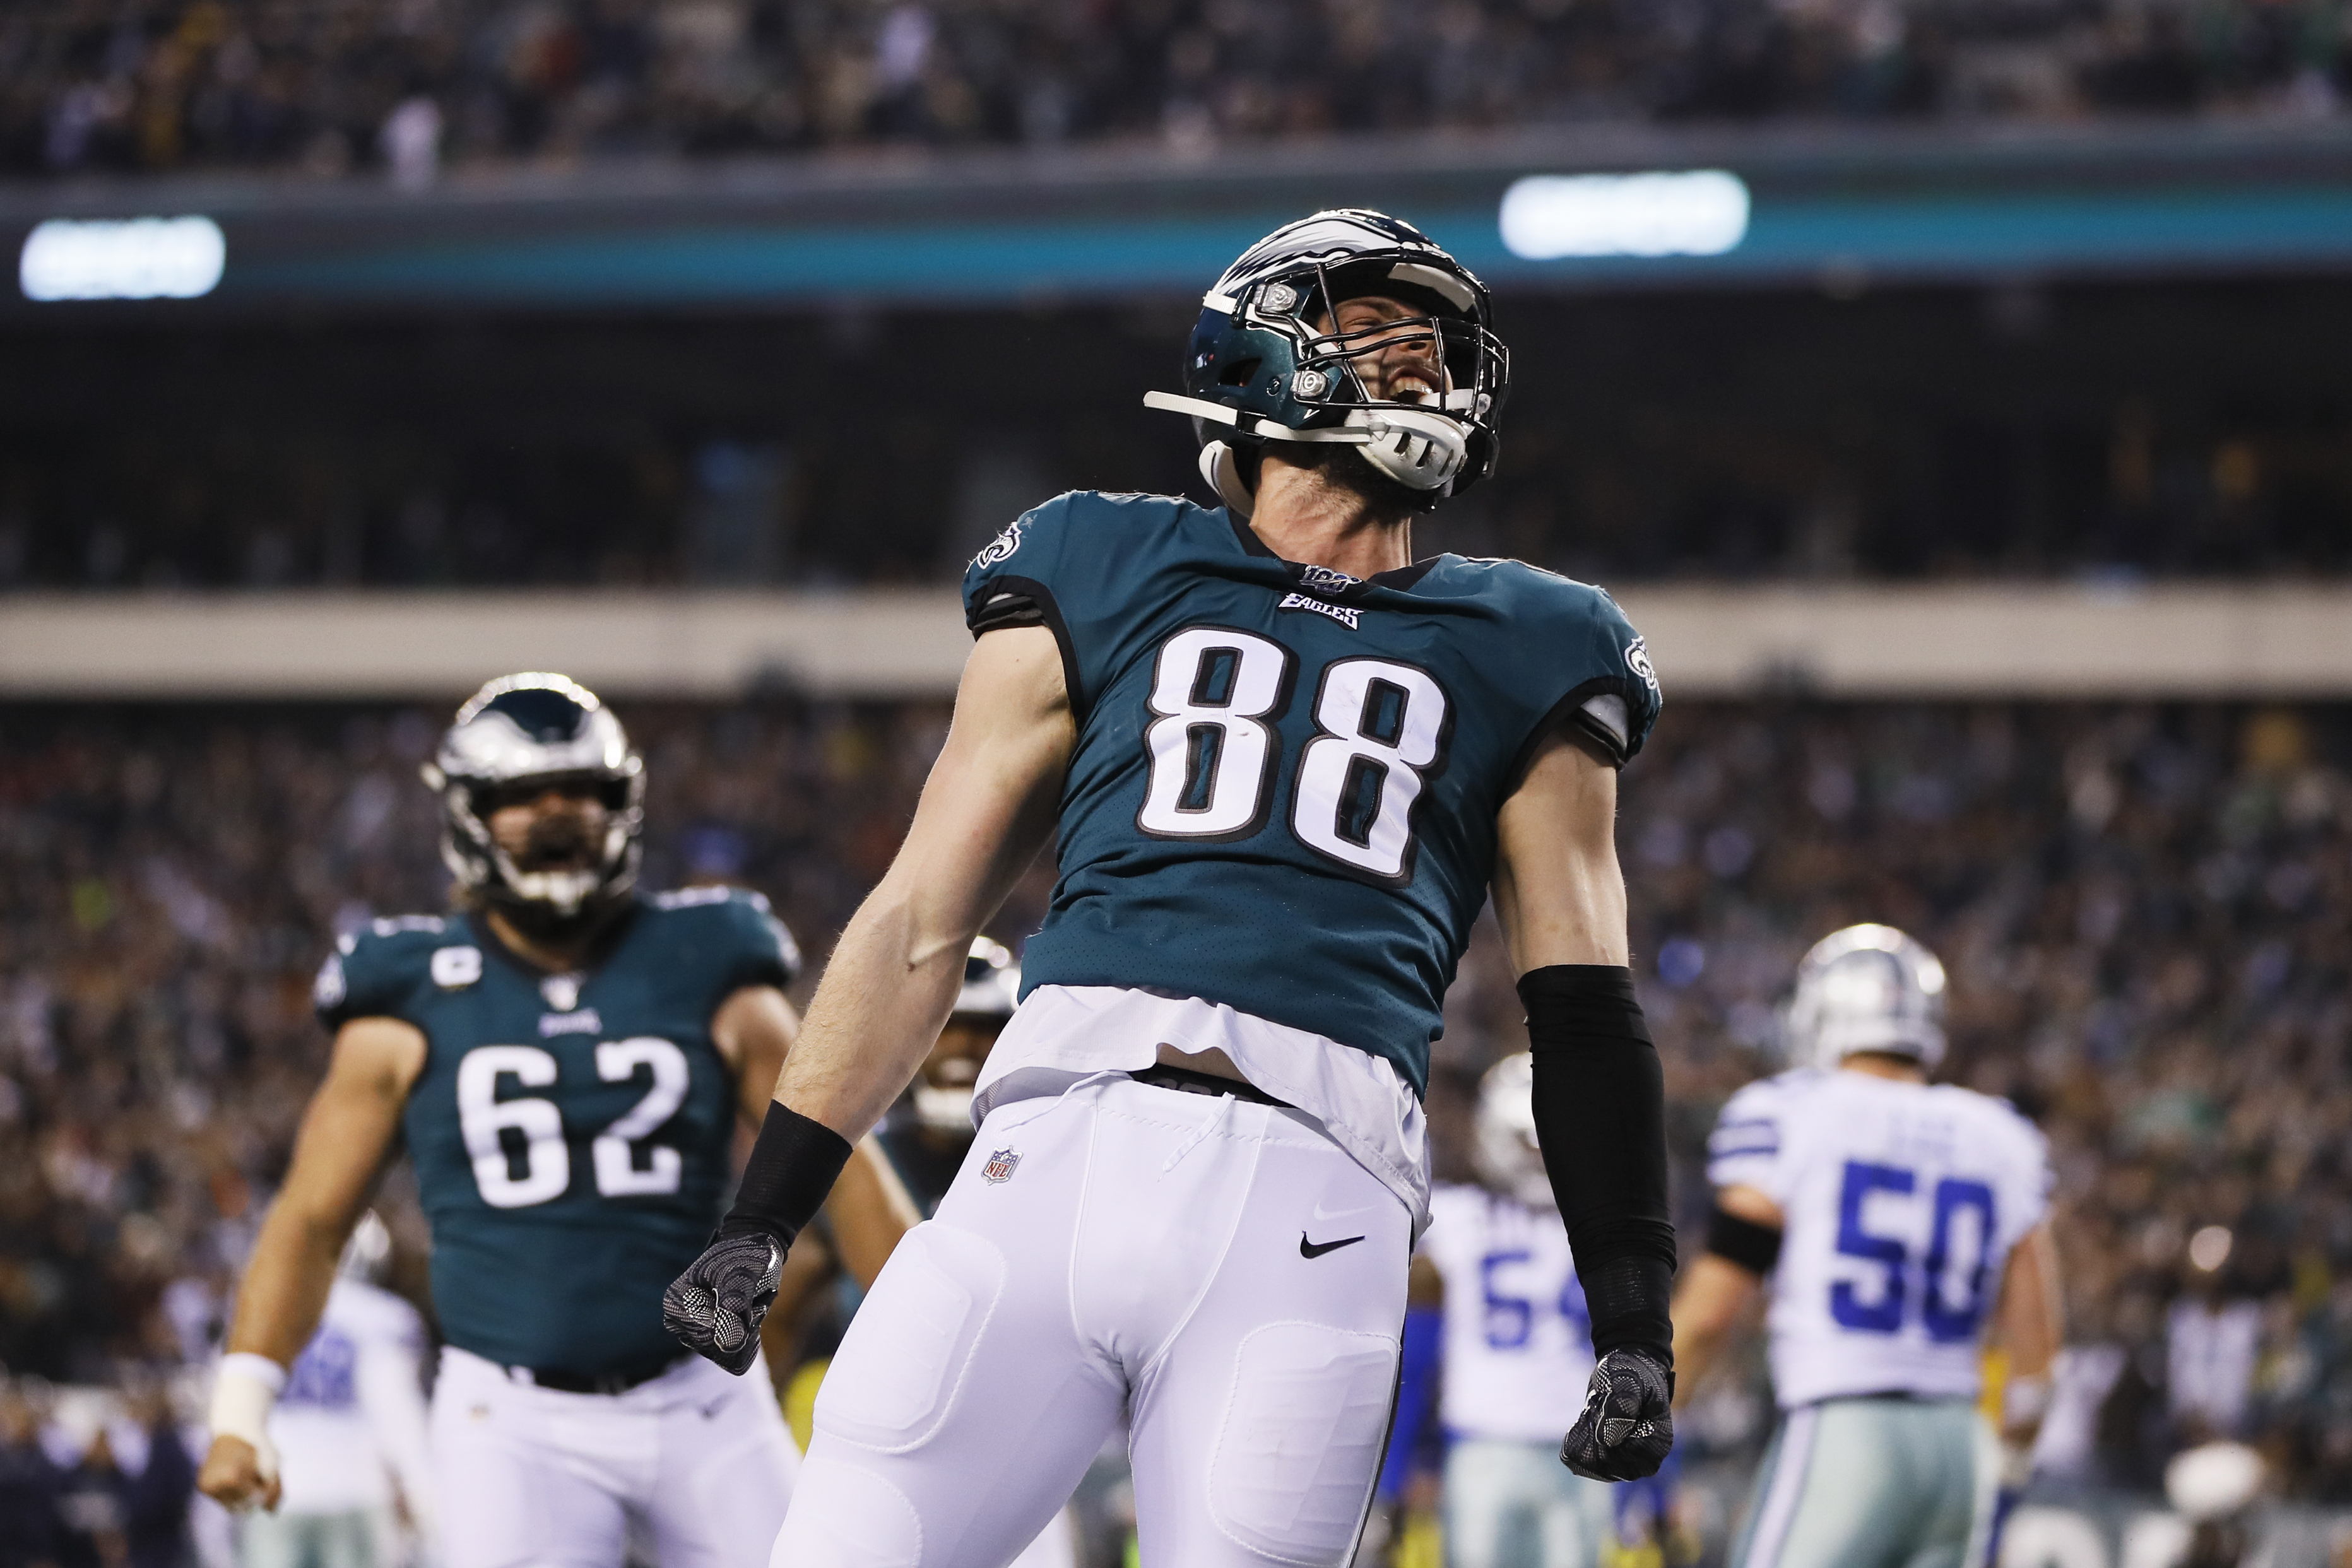 Streaking Eagles go for 4th straight win, NFC East title